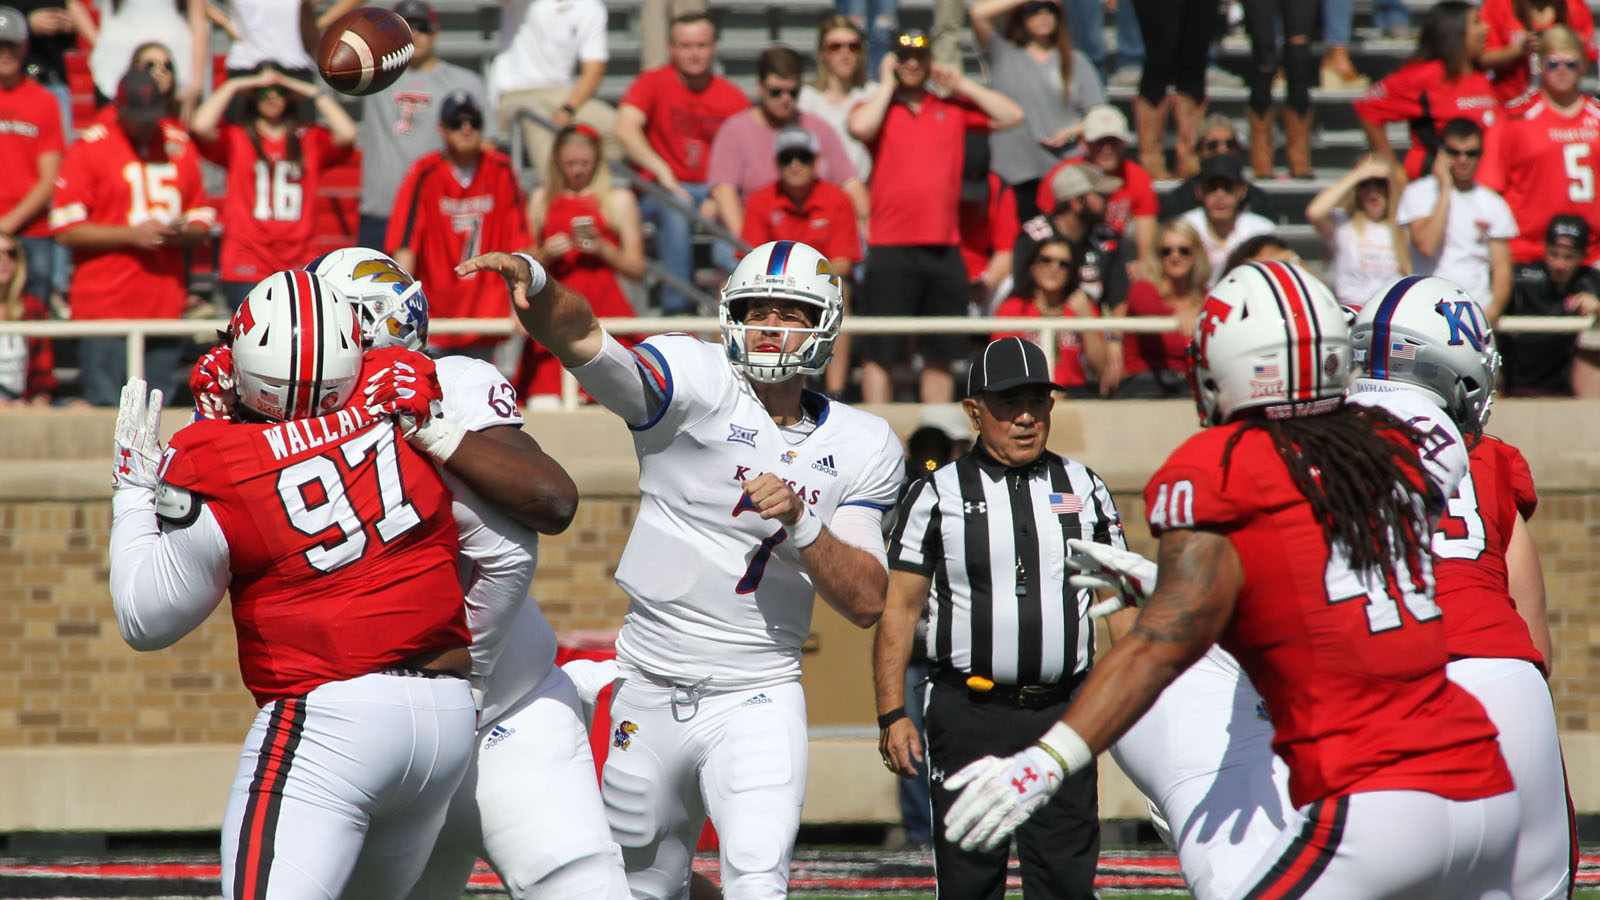 Jayhawks lose 43rd straight Big 12 road game, 48-16 to Texas Tech